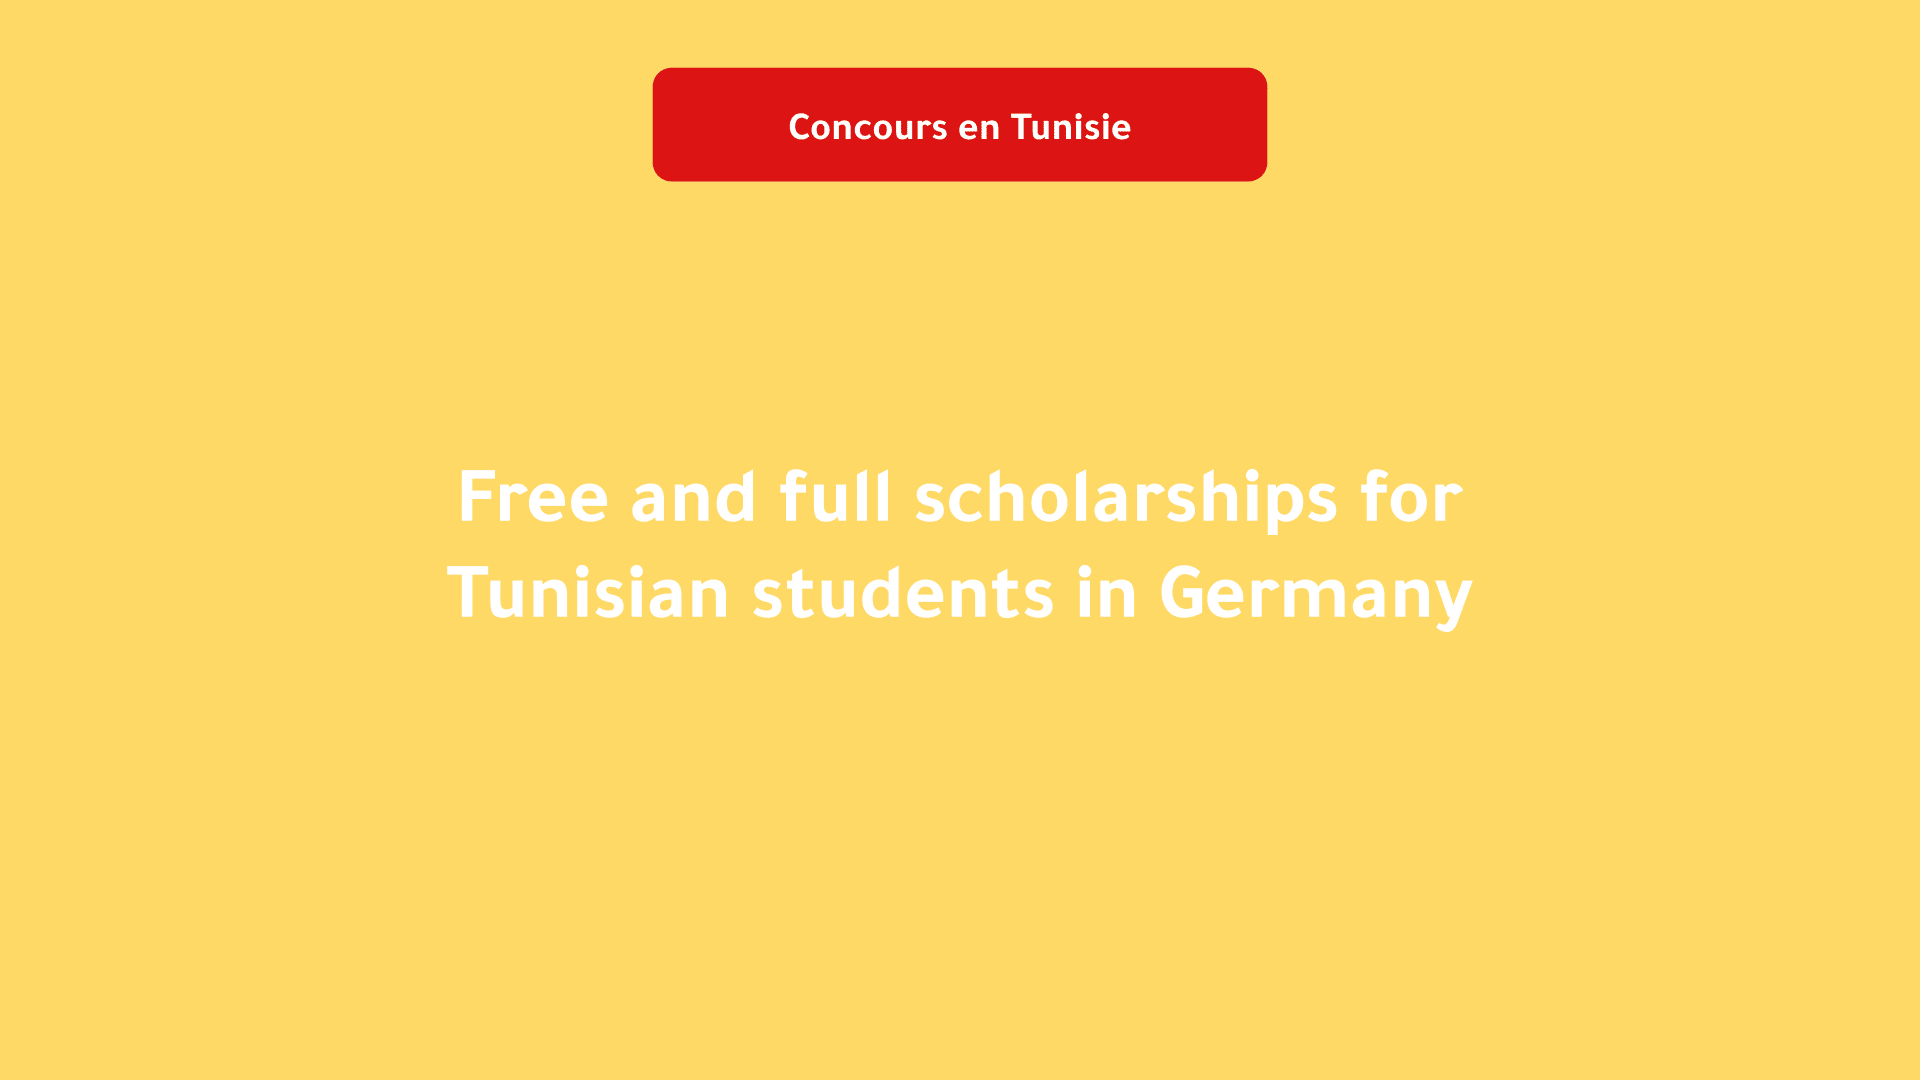 scholarships for Tunisian students in Germany